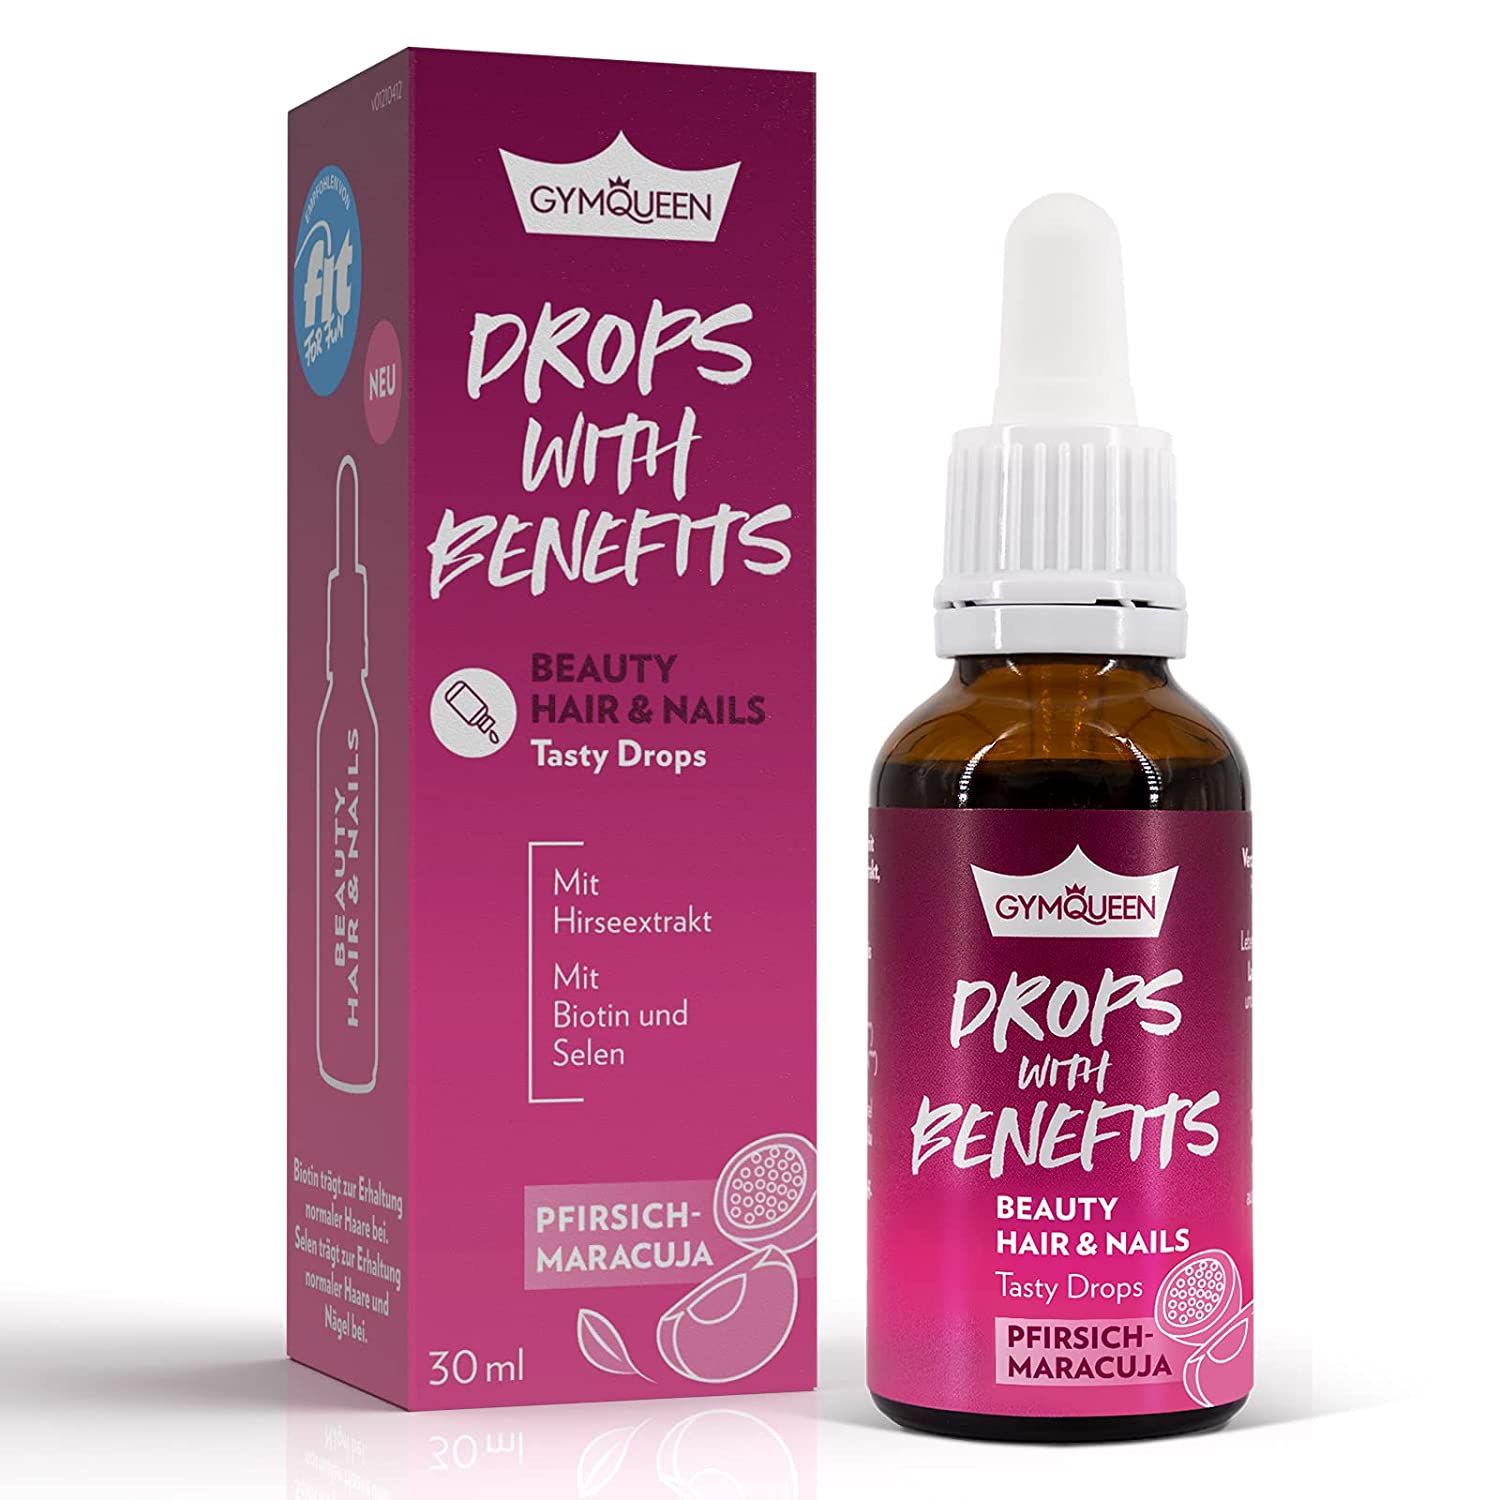 Gymqueen Beauty Drops with Benefits